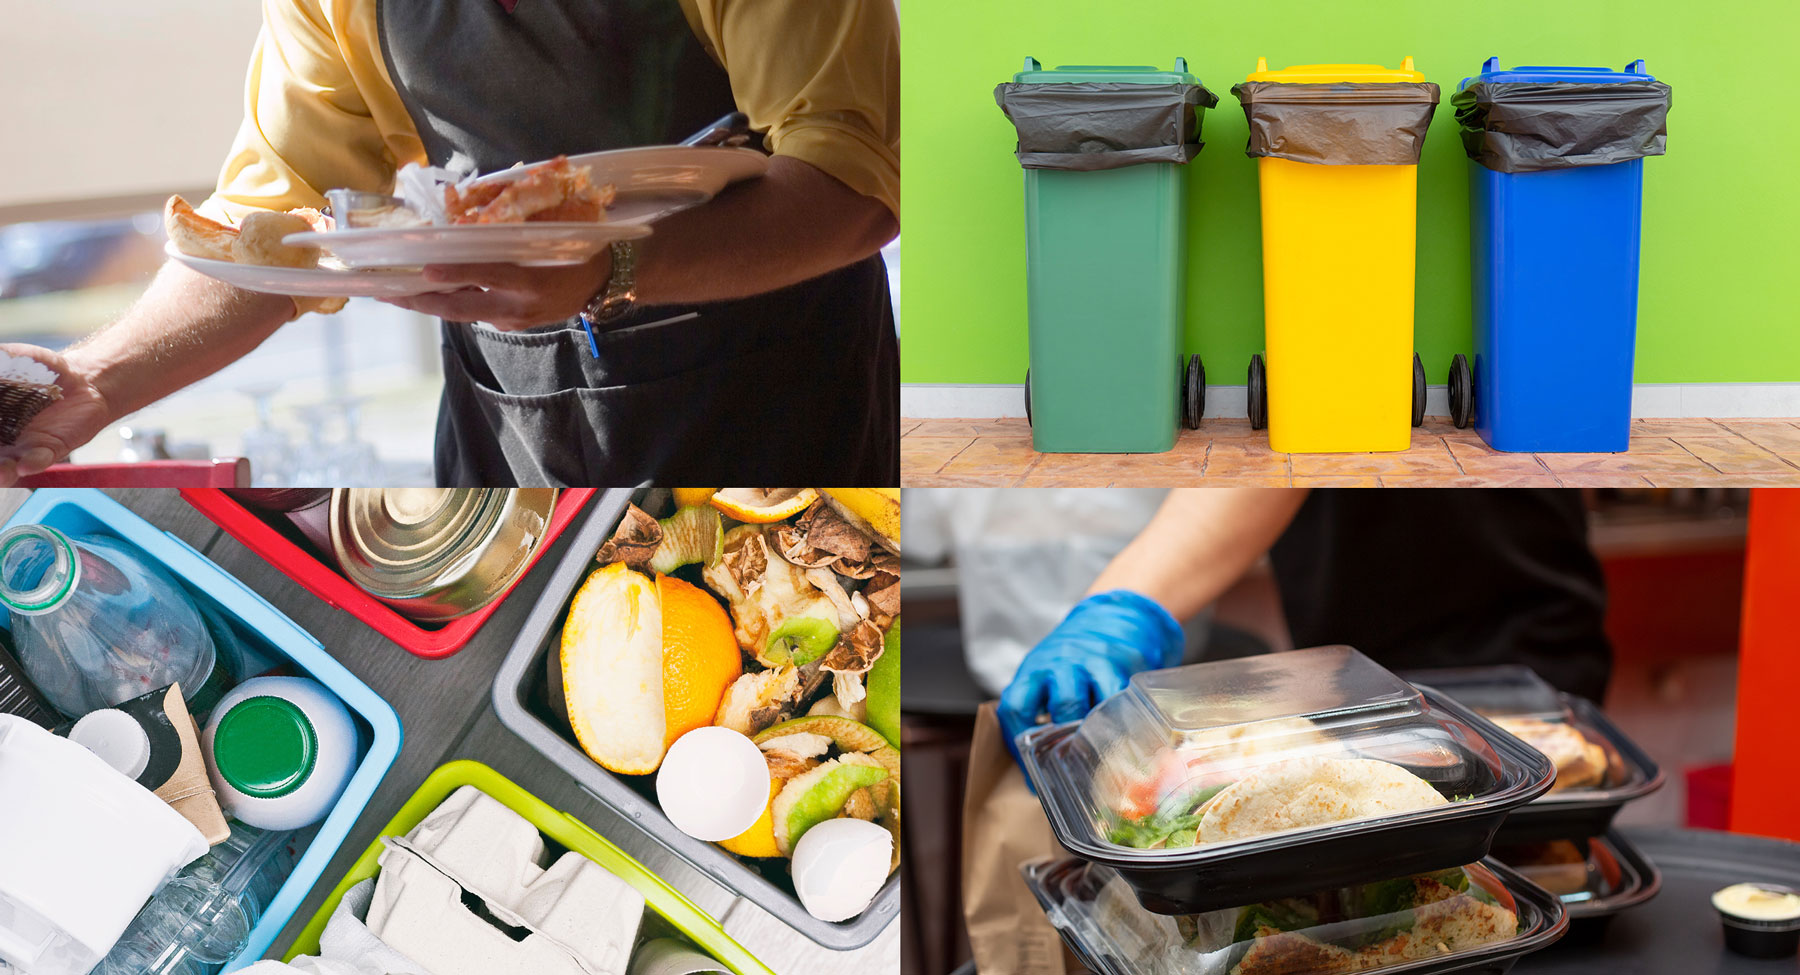 A composite image with four photos (clockwise from top left): a man carrying plates of food, three waste bins viewed from the front, four recycling bins with separated types of waste, and a stack of restaurant food in plastic containers